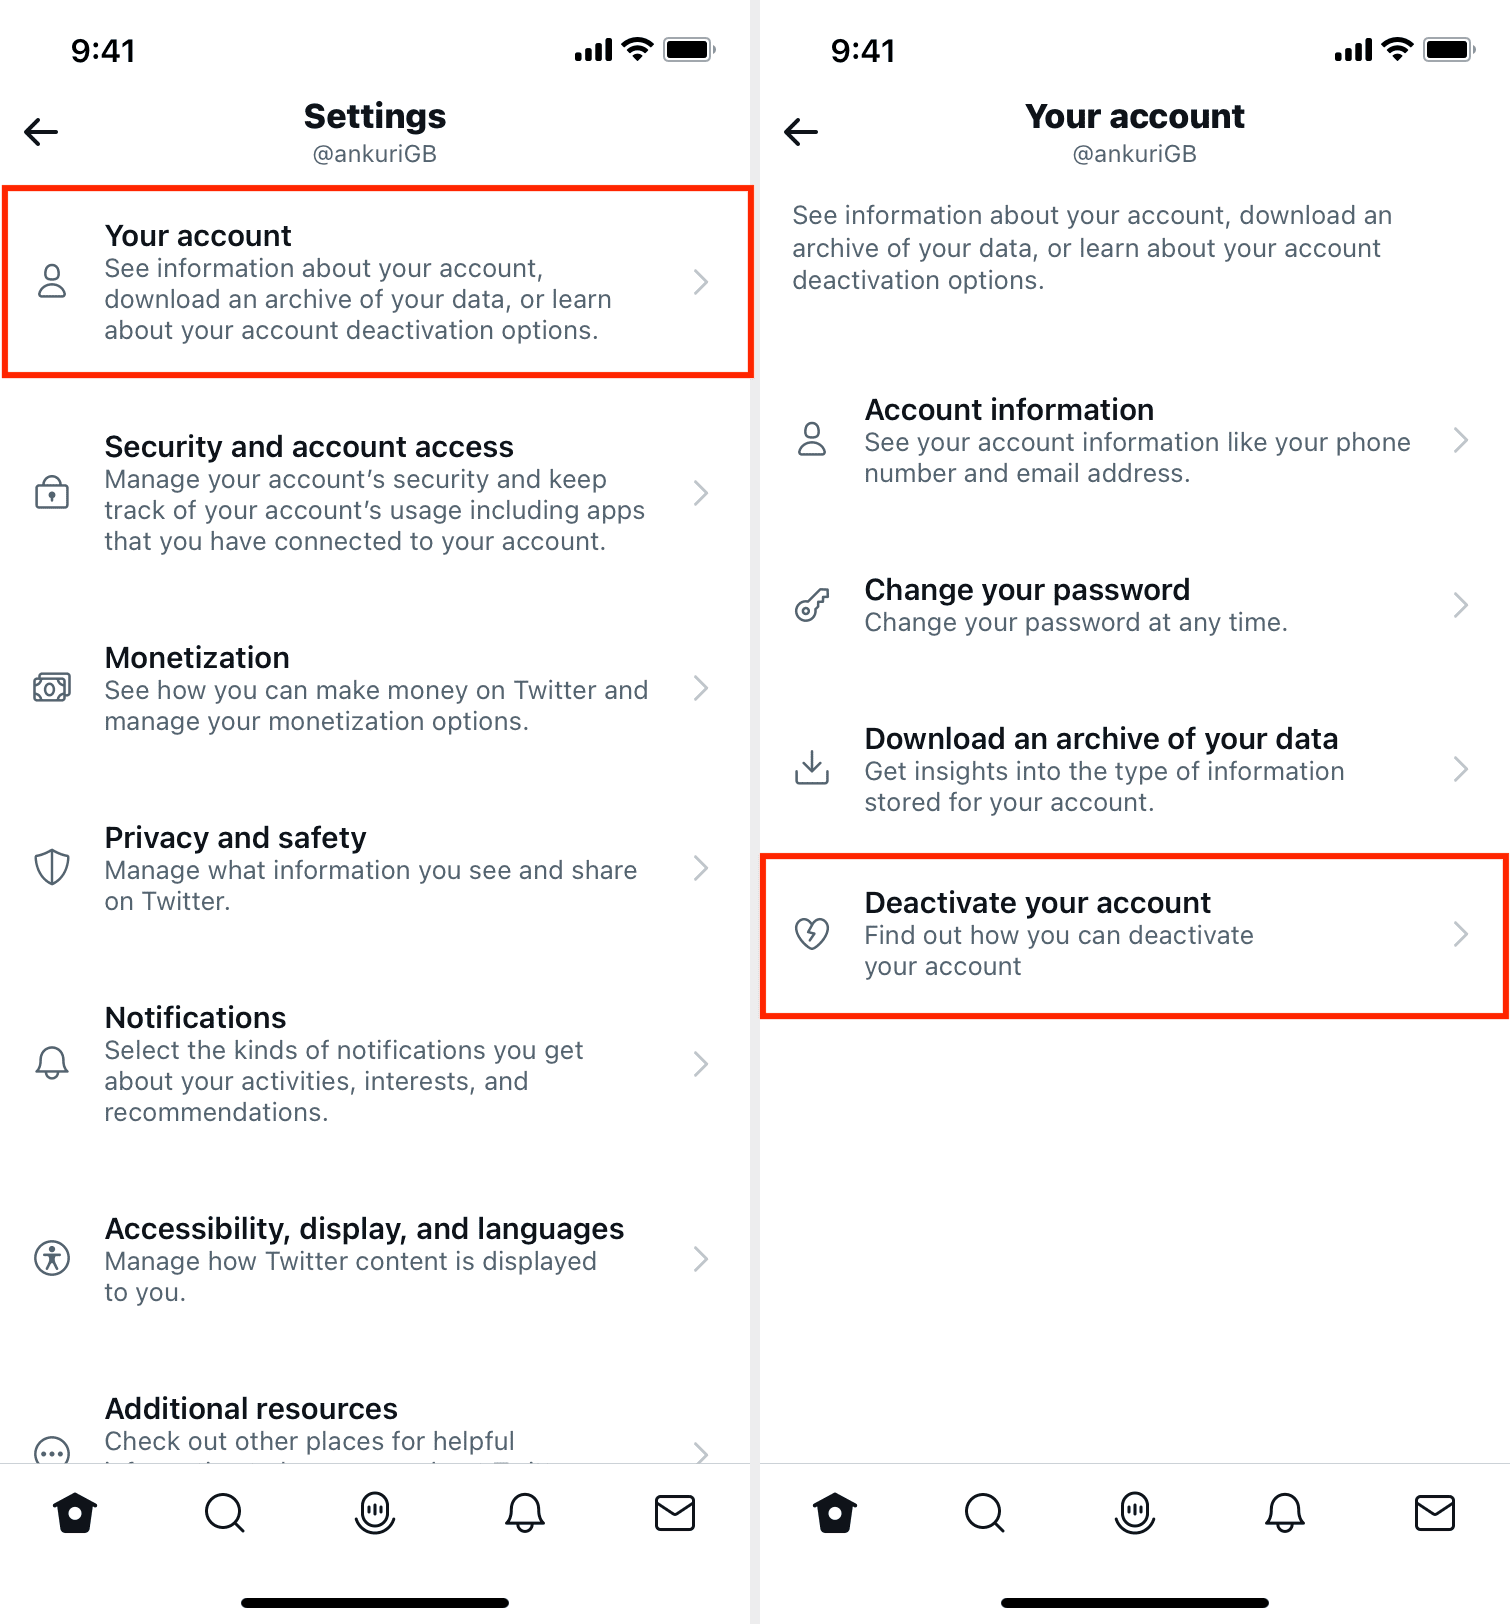 Twitter Deactivate your account settings